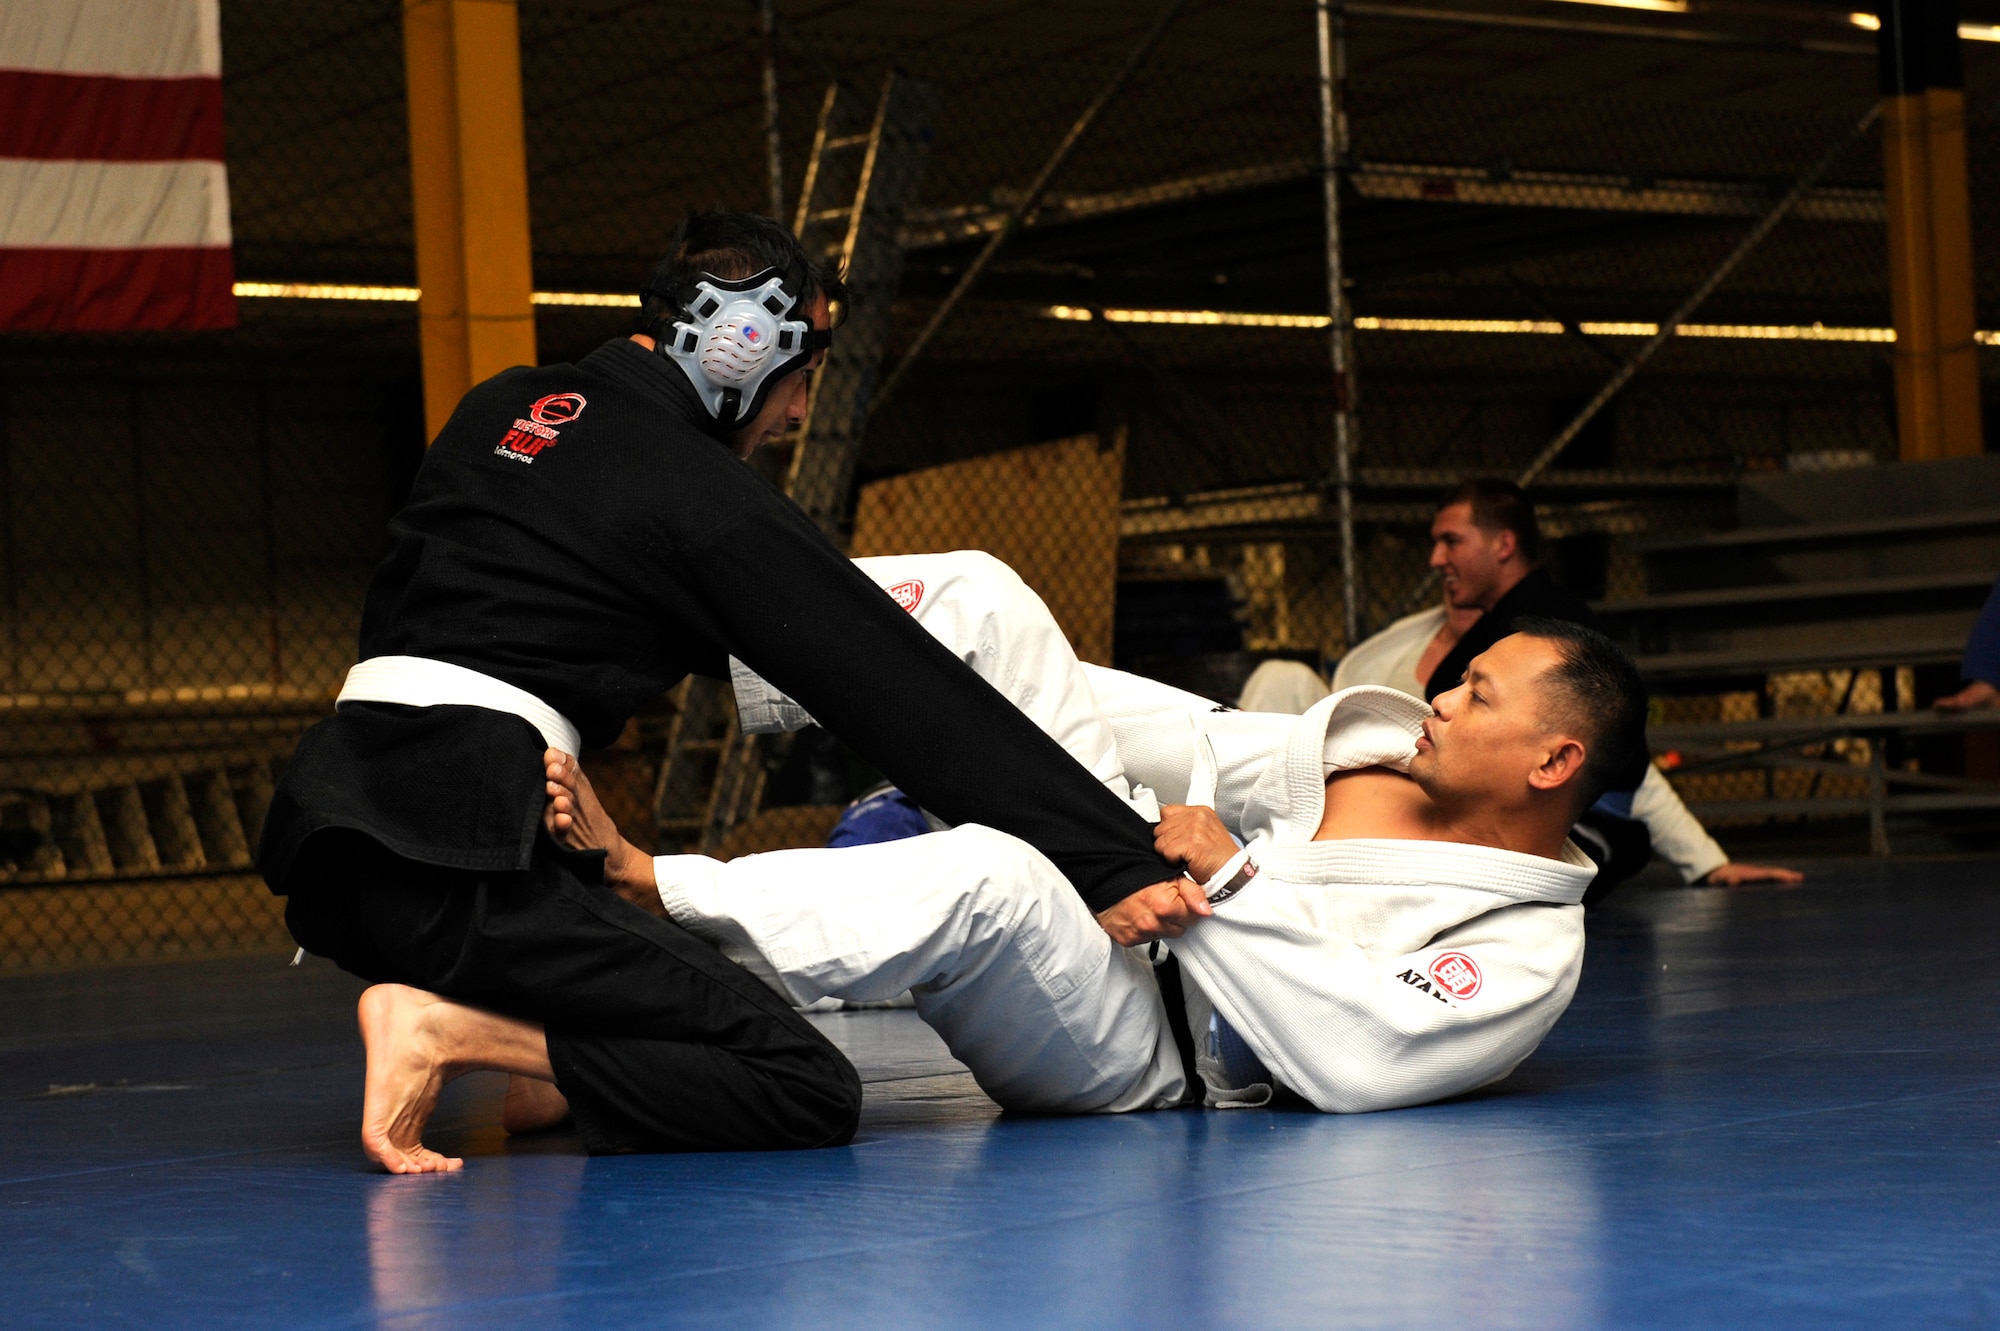 Students of the Brazilian Jiu-jitsu class spar and practice throwing during a class at Rhines Ordnance Barracks Germany, Nov. 26, 2012. Students here go over different self-defense techniques. Many different people come through the class all with different skill levels.  Some people practice Jujitsu for the technique, others for fitness or even just for self-defense. Classes are every Monday and Wednesday at 6 p.m. to 8 p.m. (U.S. Air Force photo/ Senior Airman Aaron-Forrest Wainwright) 